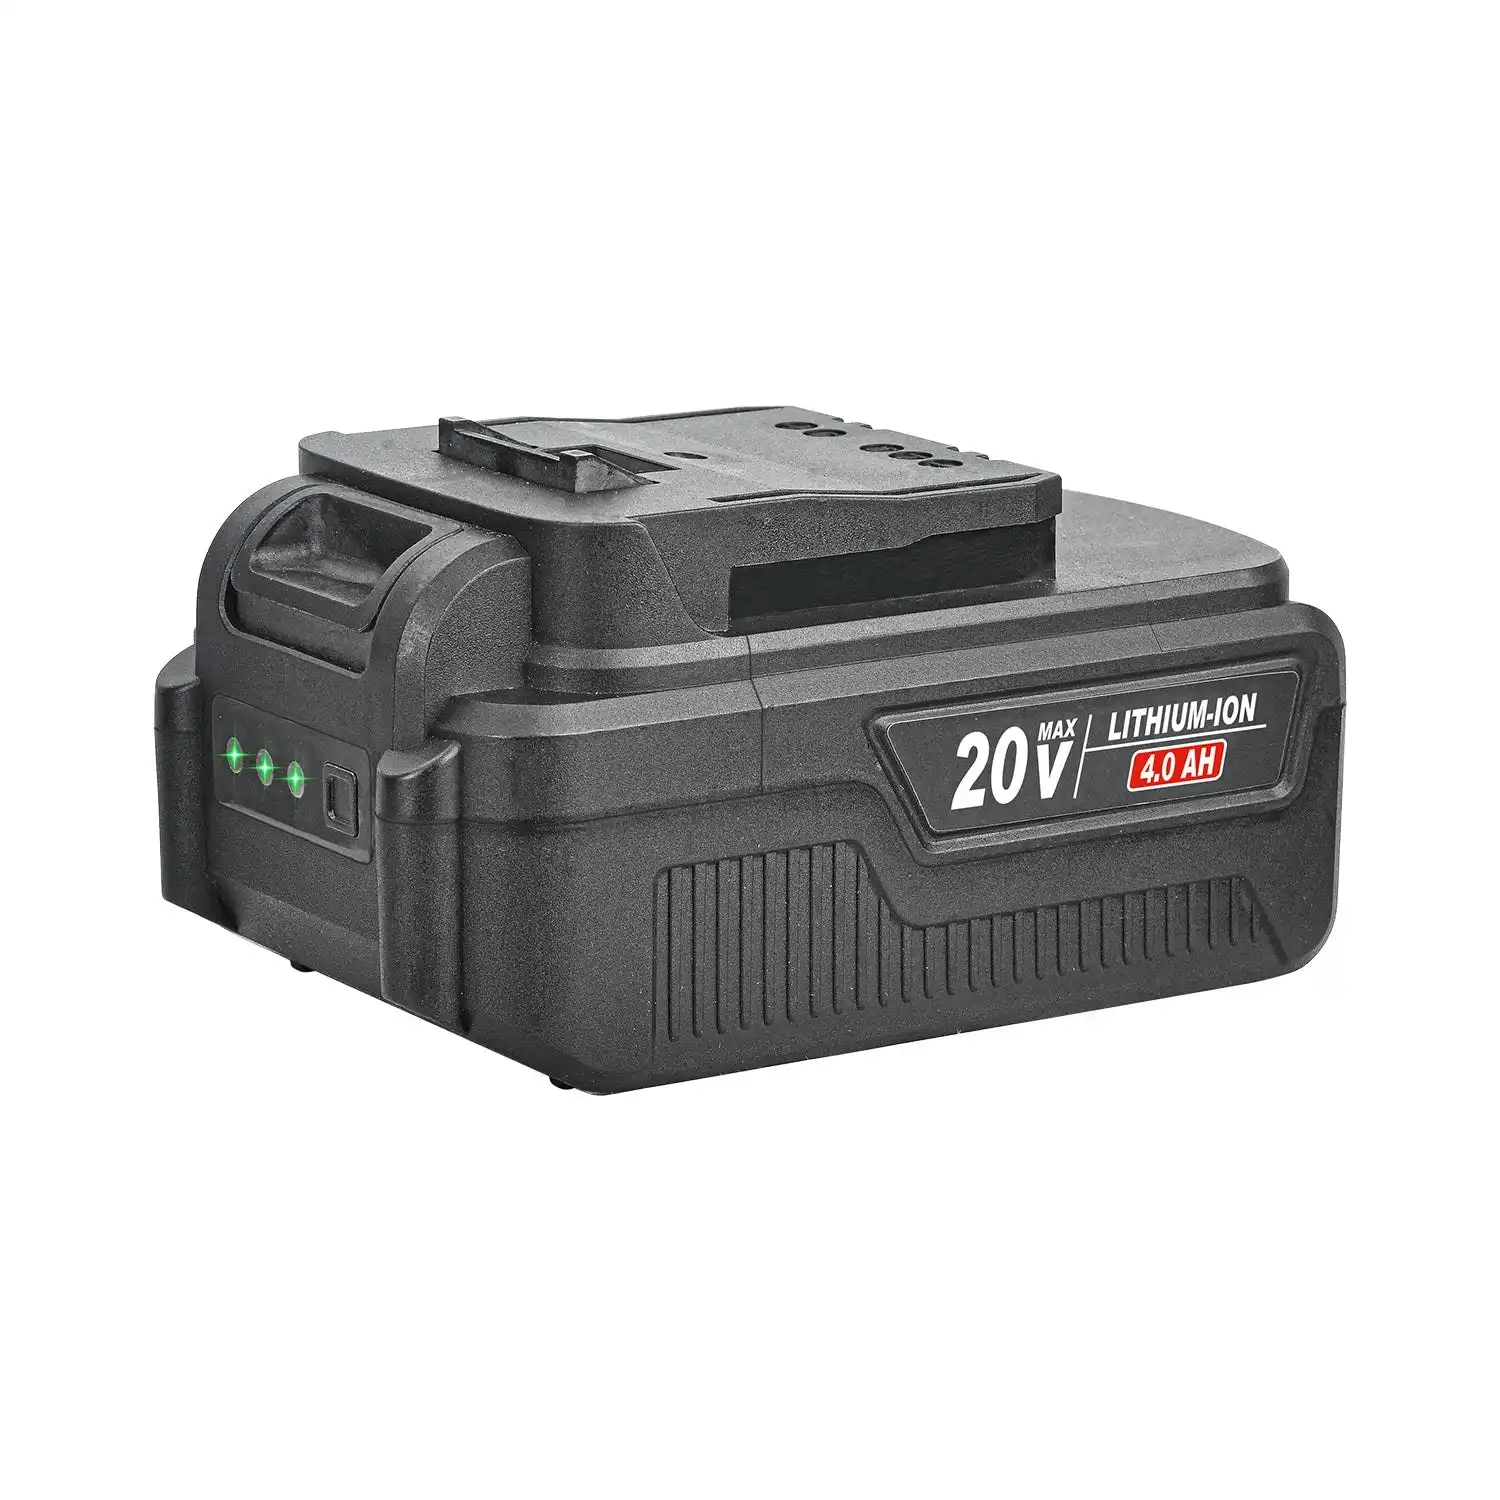 Topex 20v 4.0Ah Lithium-Ion Battery